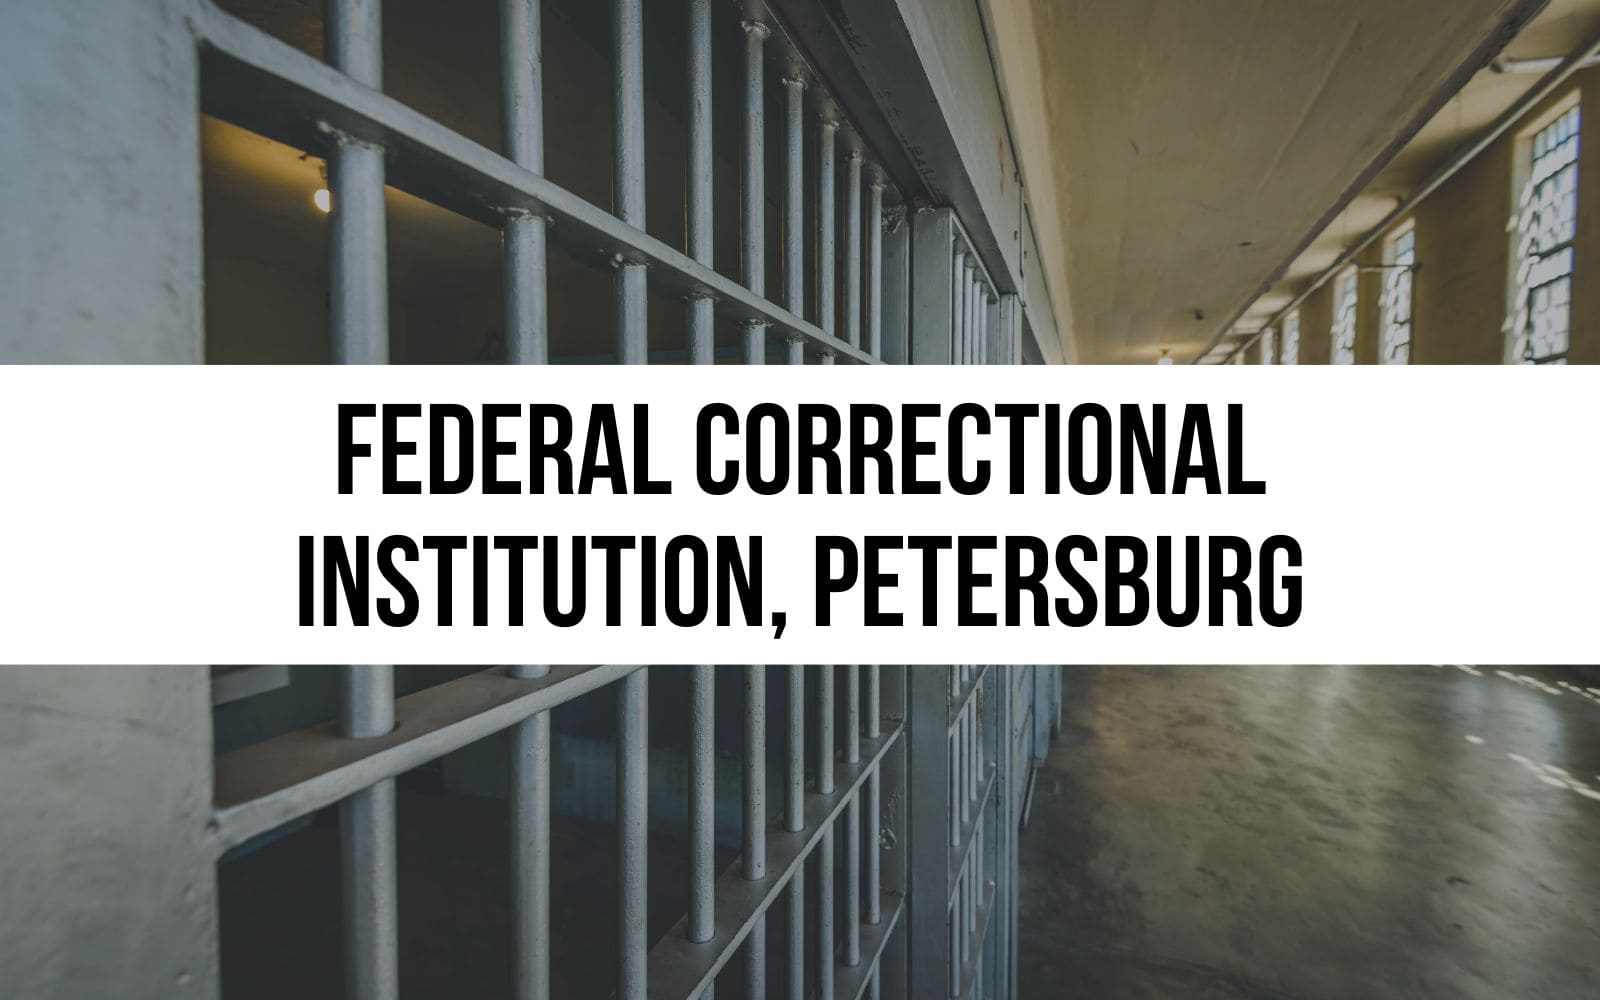 Federal Correctional Institution, Petersburg